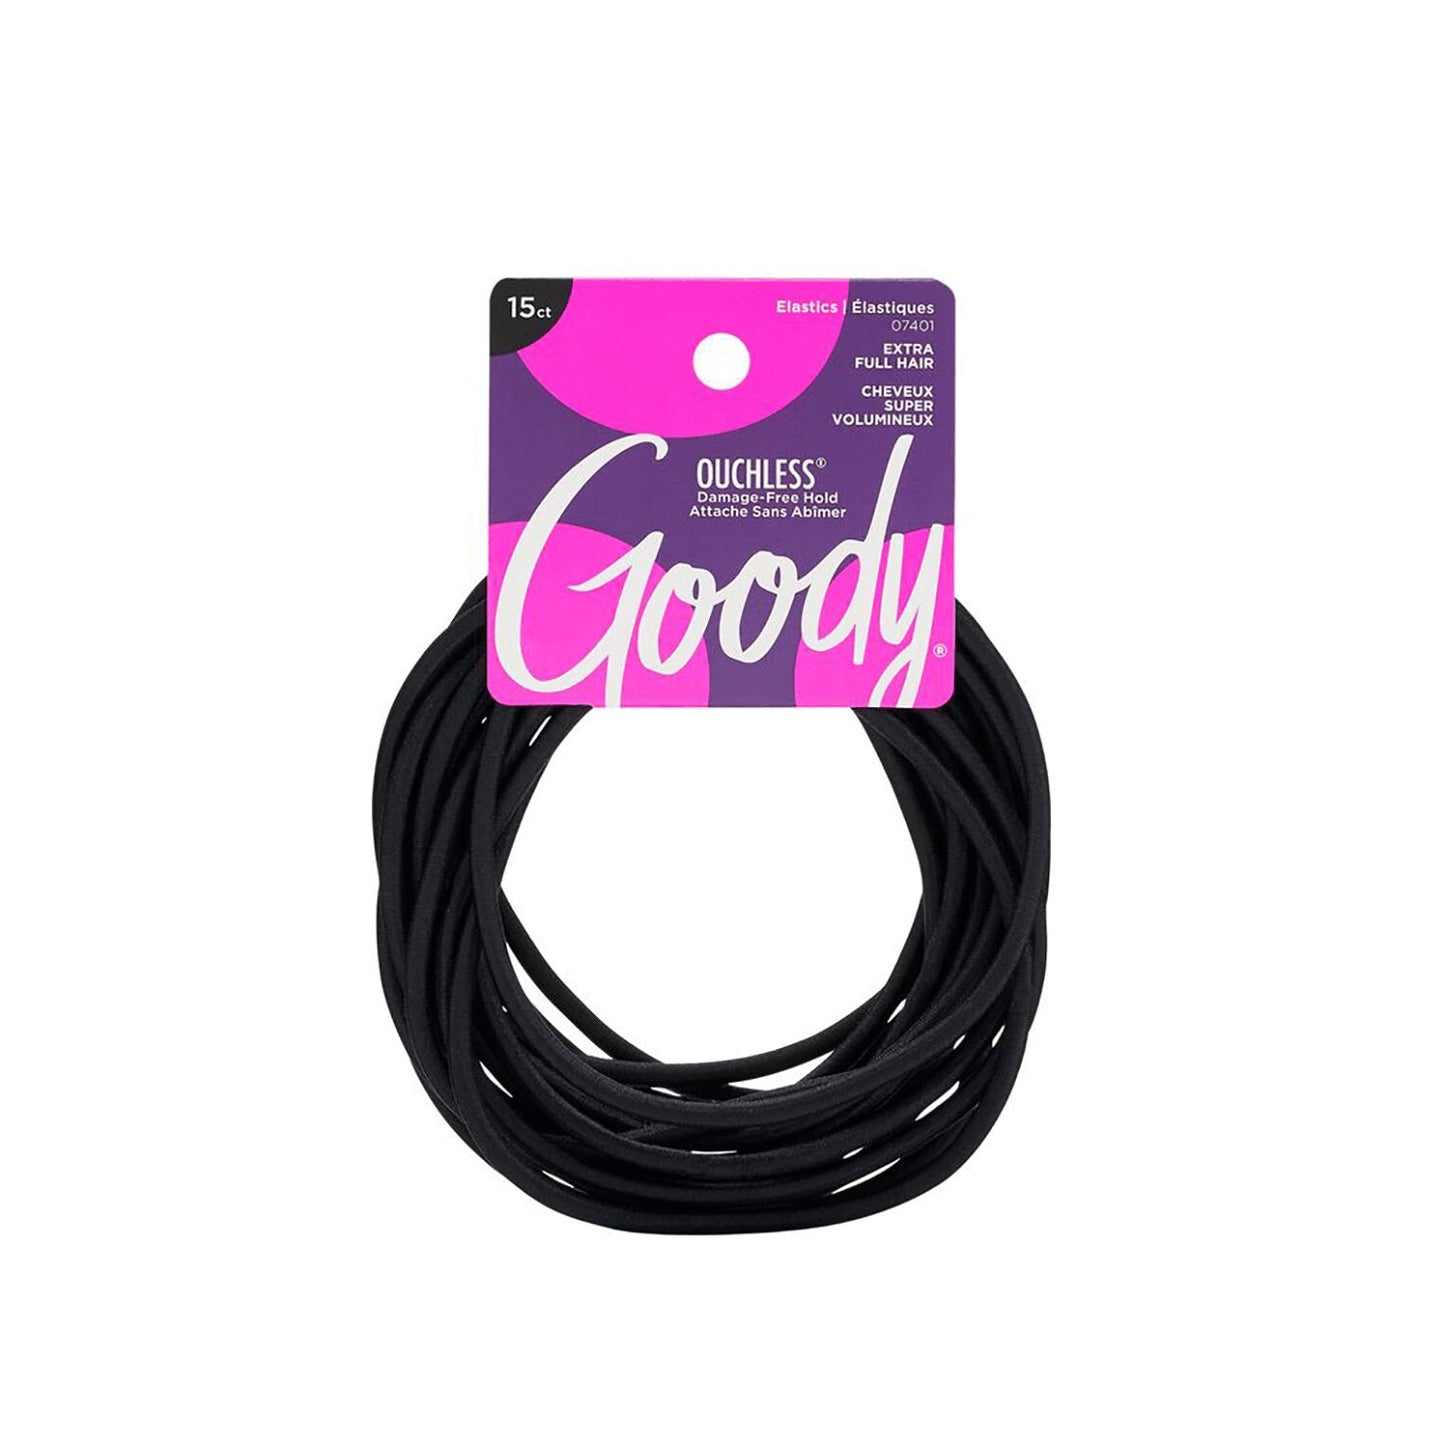 Goody Extra Long Ouchless Elastics 15 Count